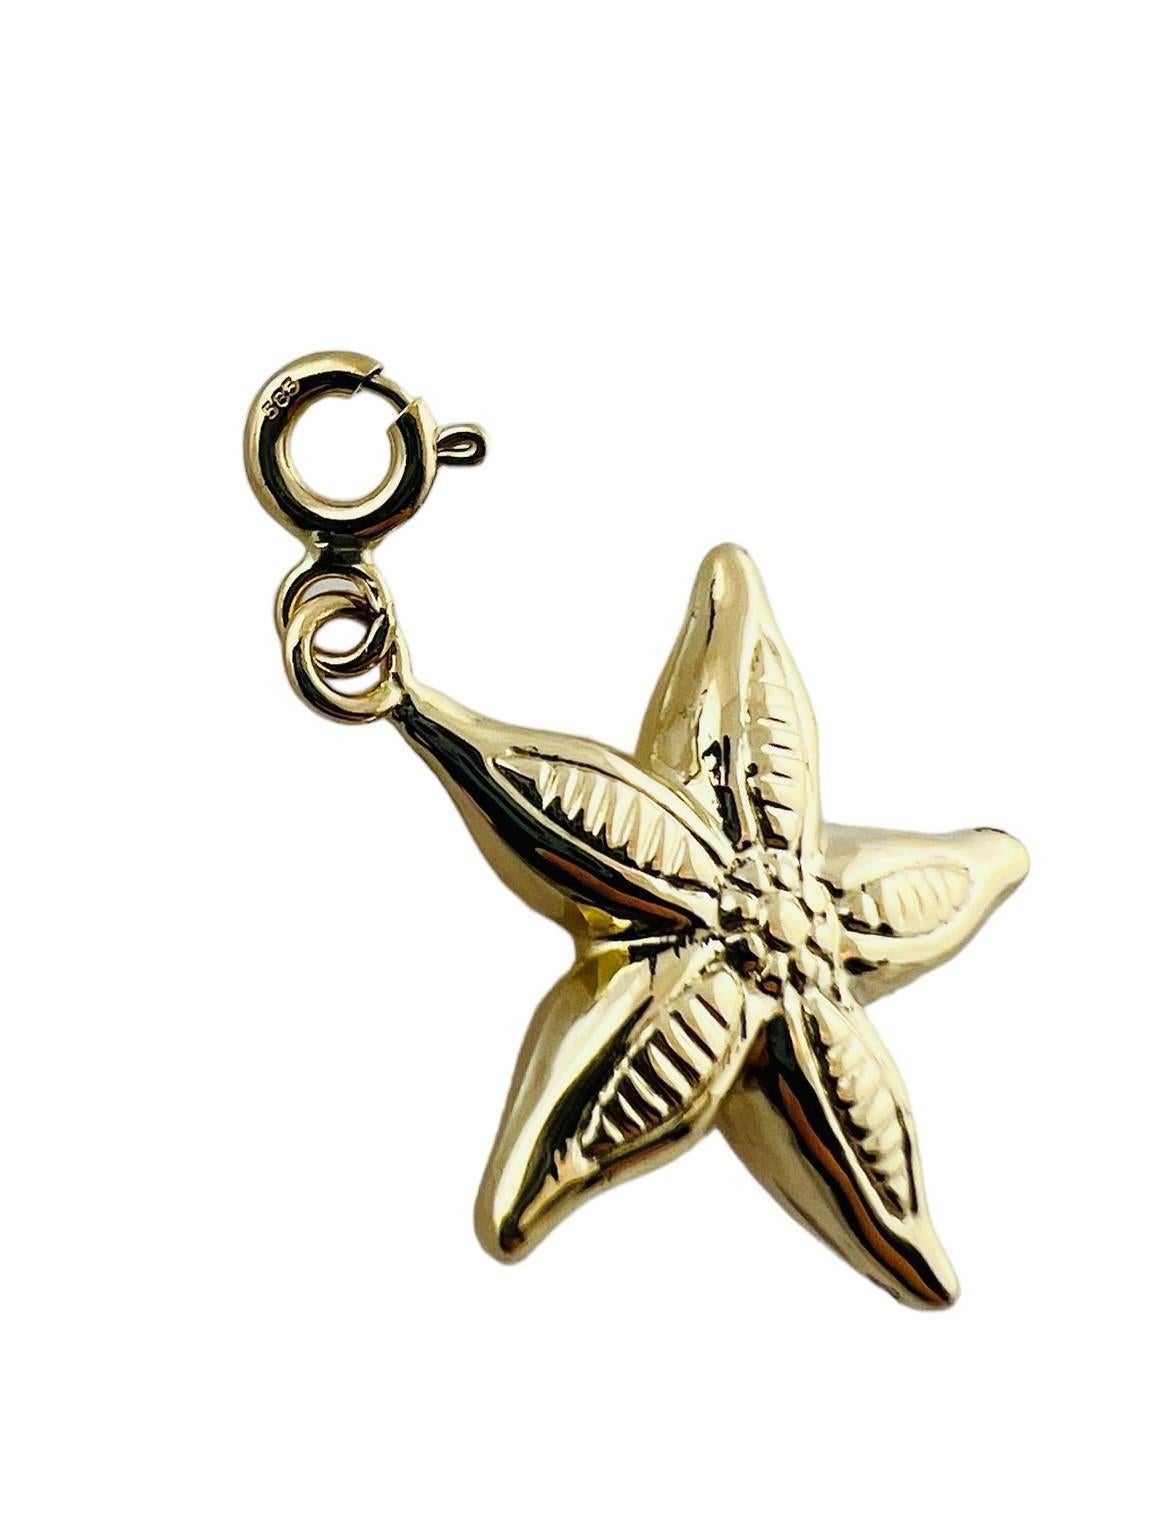 14K Yellow Gold Starfish Charm #15550 For Sale 2